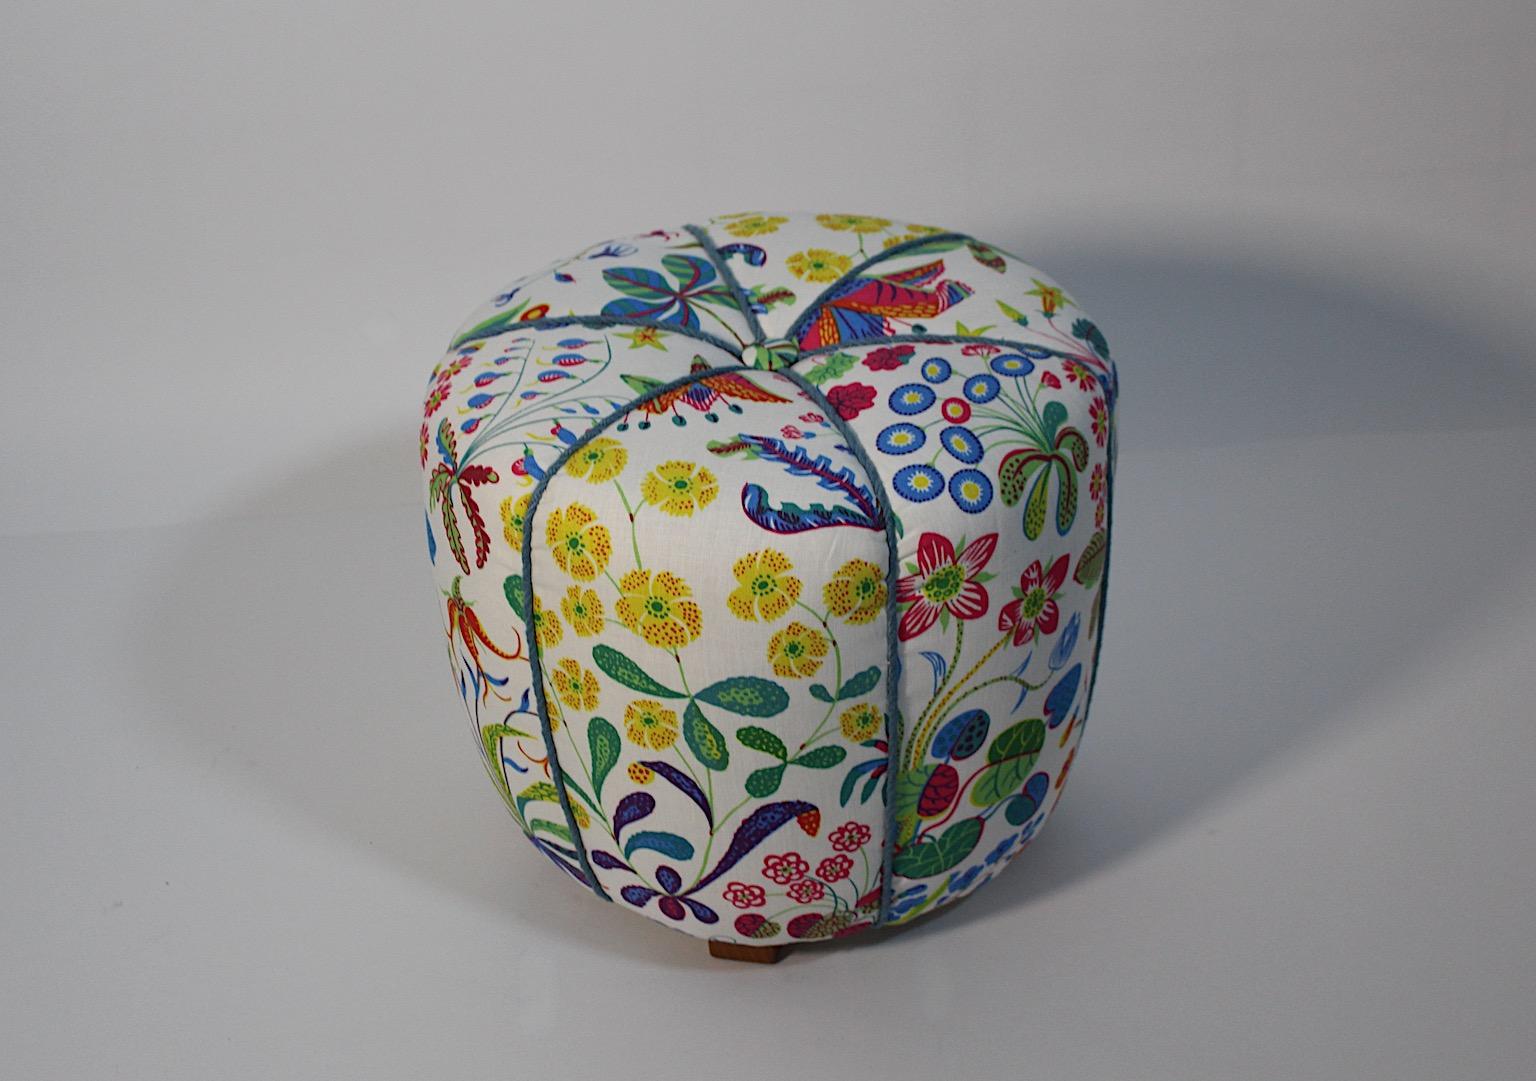 Art Deco Vintage Beech White Josef Frank Fabric Pouf or Stool 1930s Vienna For Sale 4